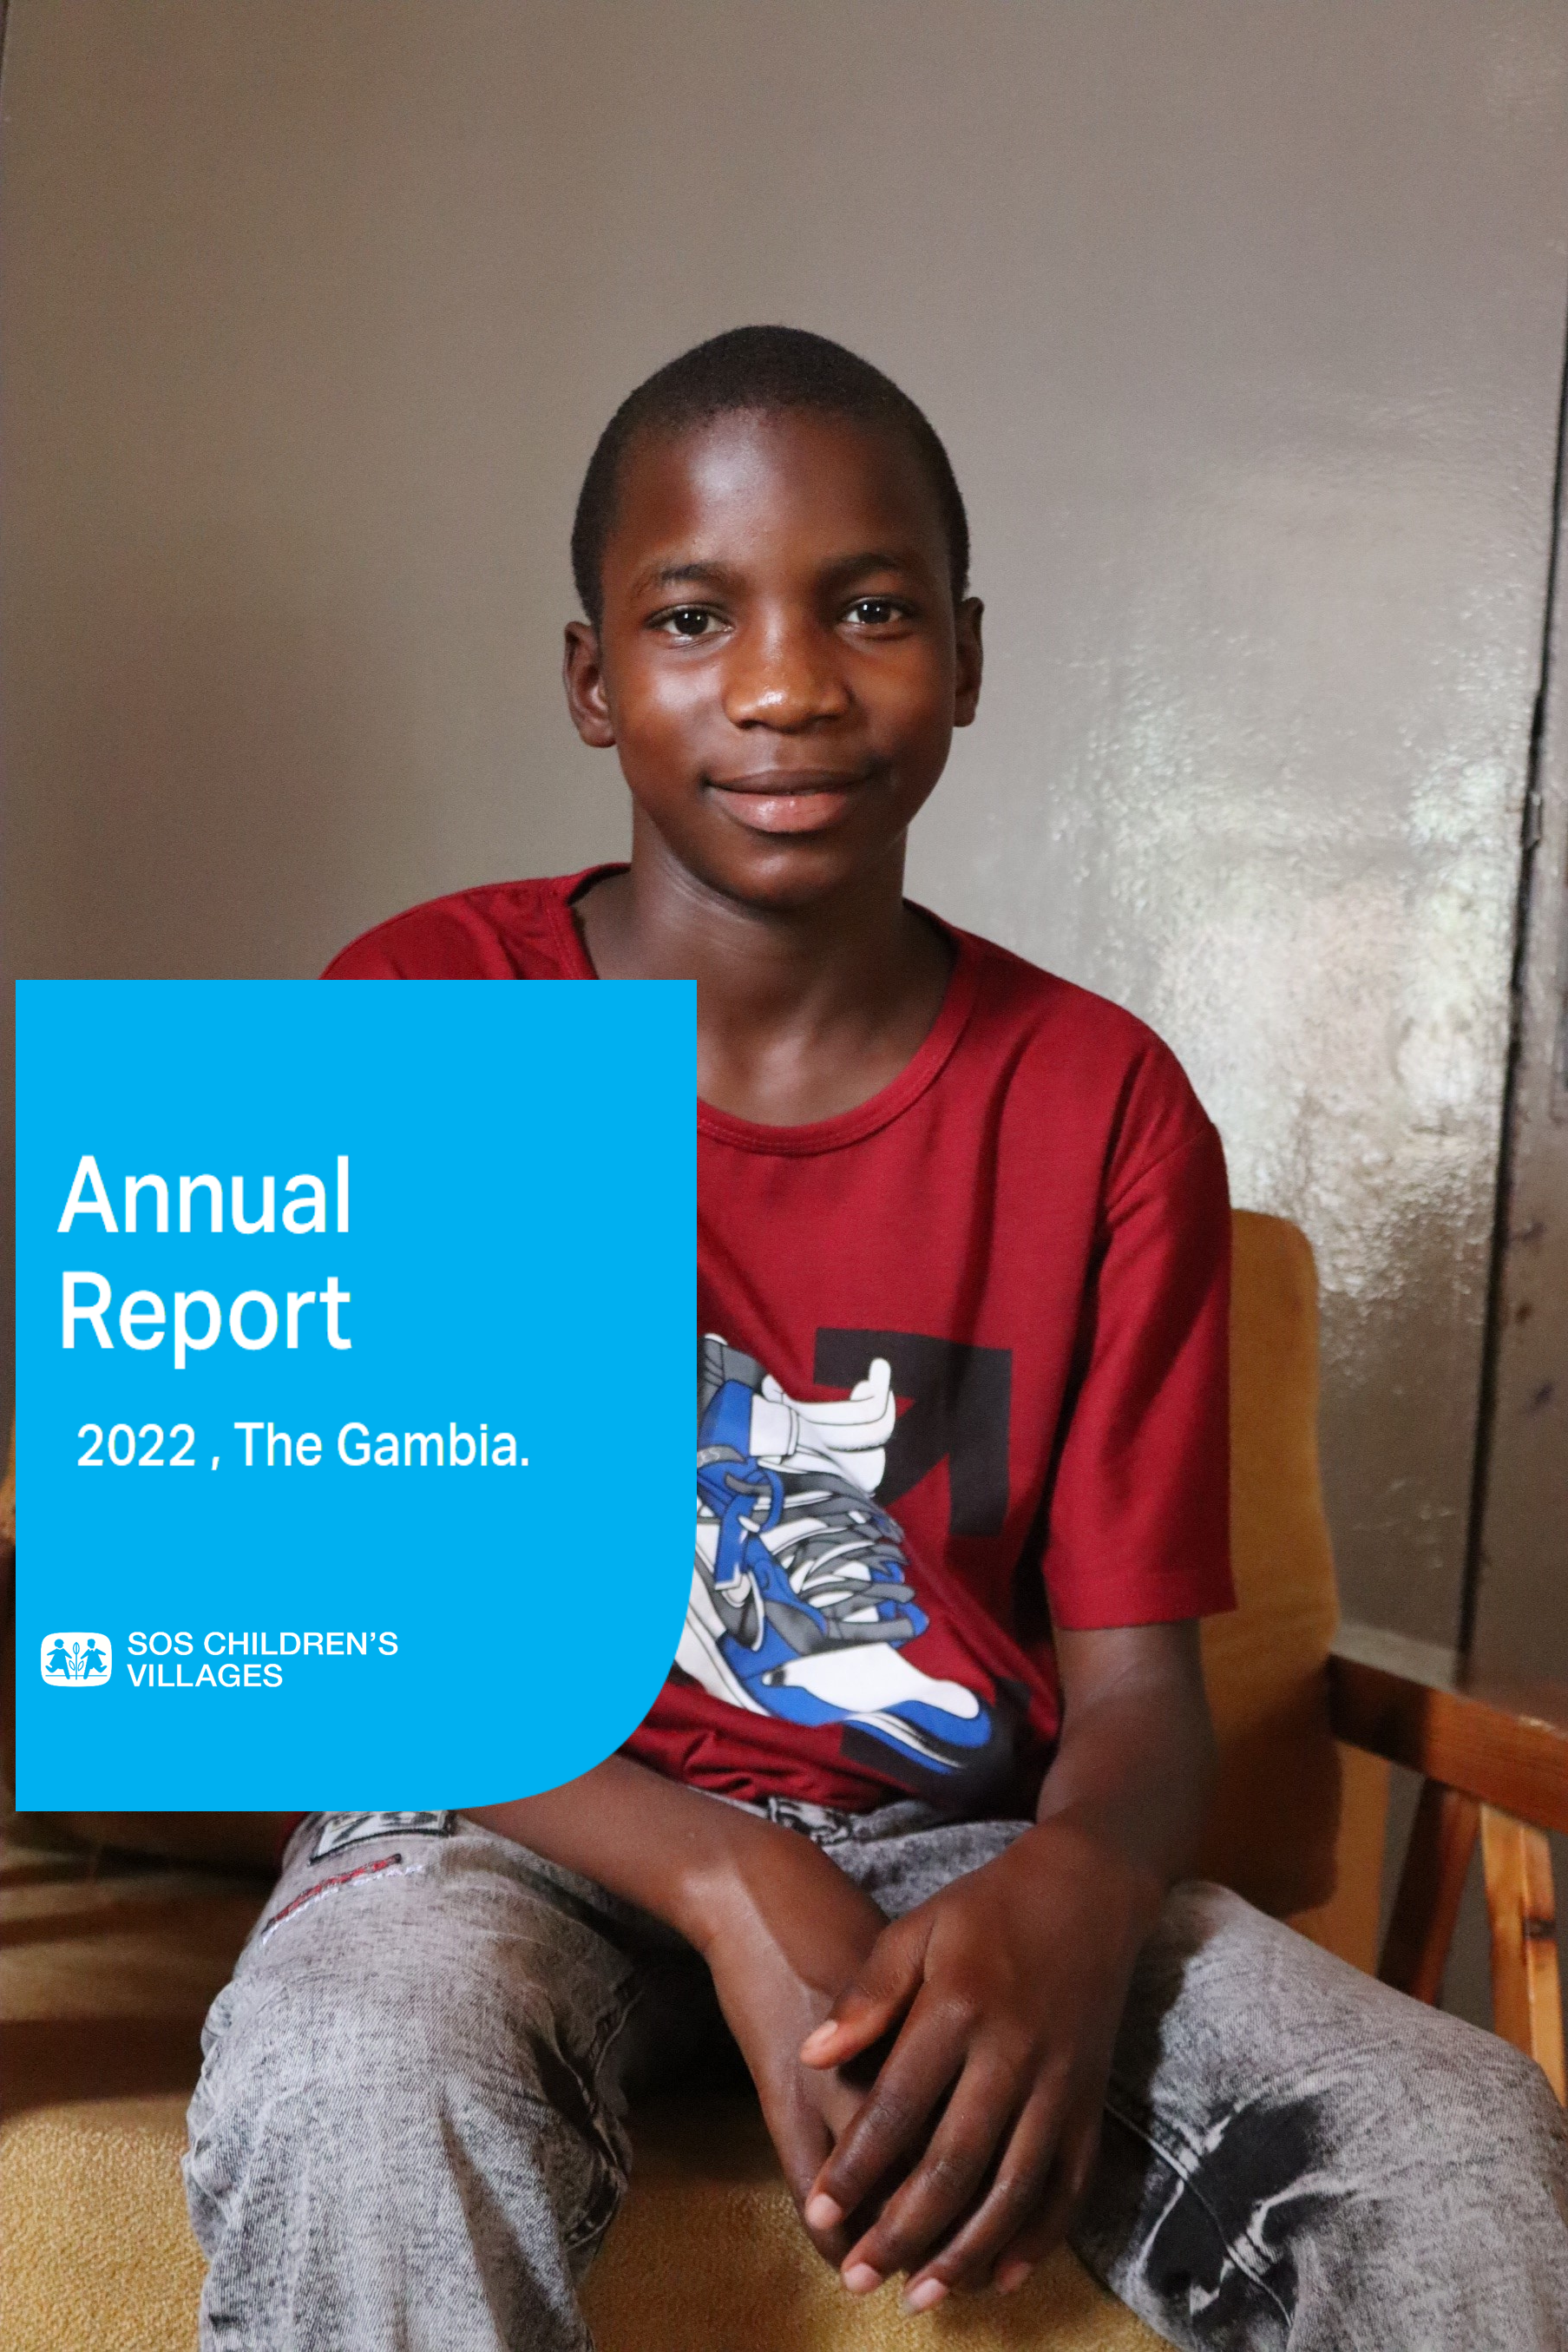 Annual Report 2022 -SOS Children’s Villages in The Gambia.